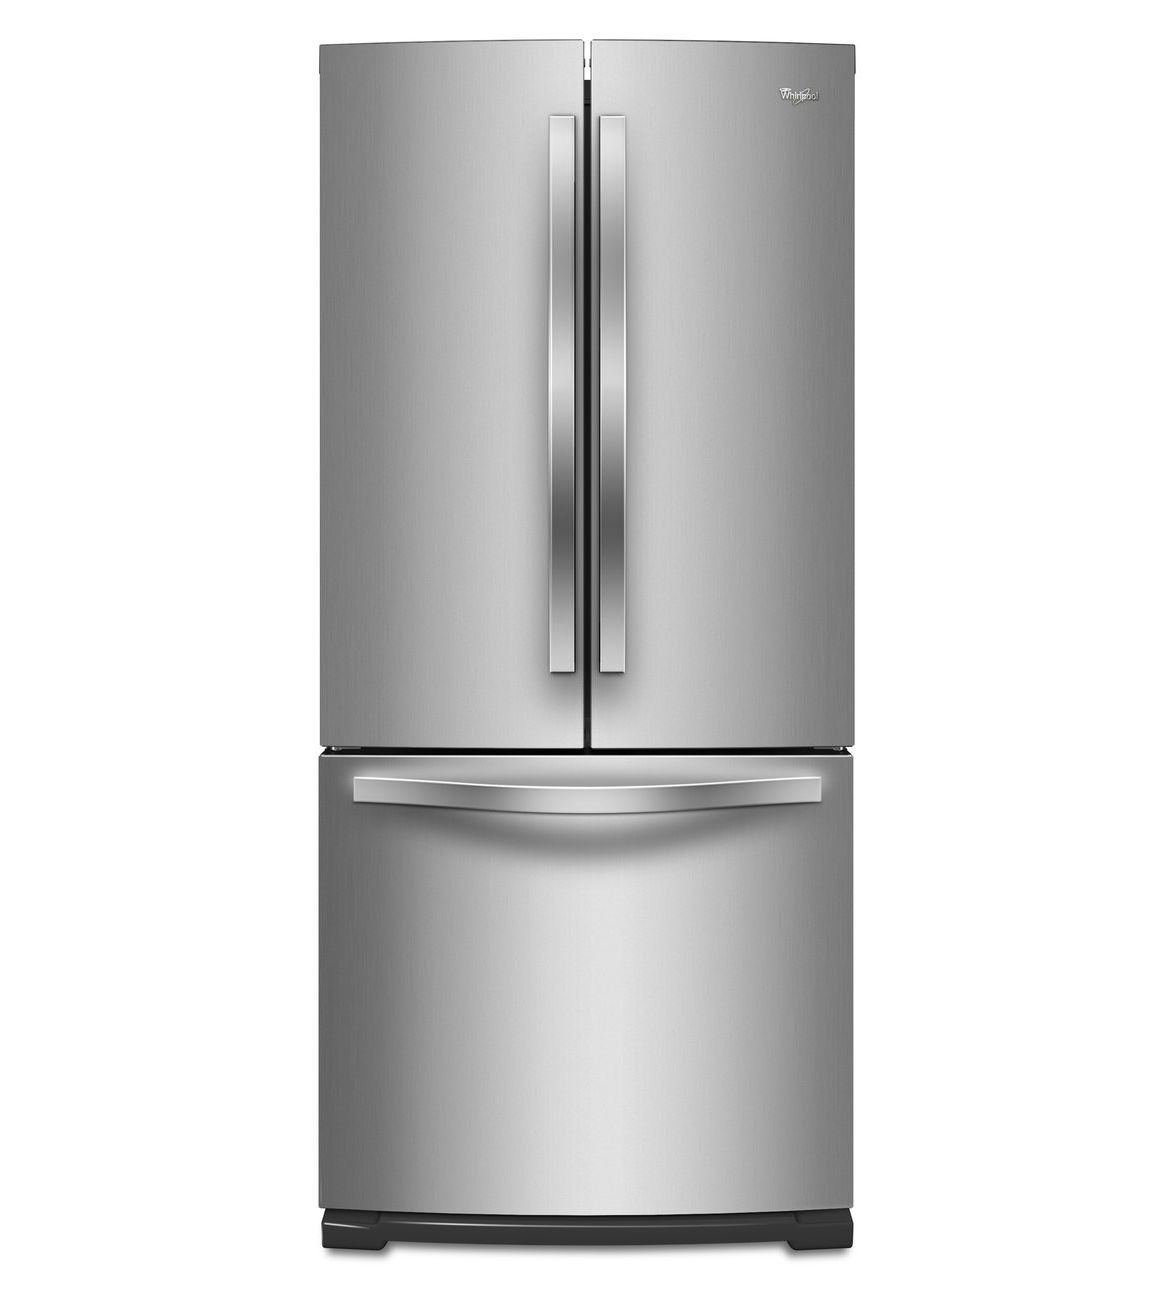 Whirlpool 30-inch Wide French Door Refrigerator - more colors - Master Stainless Steel Refrigerator 30 Inches Wide